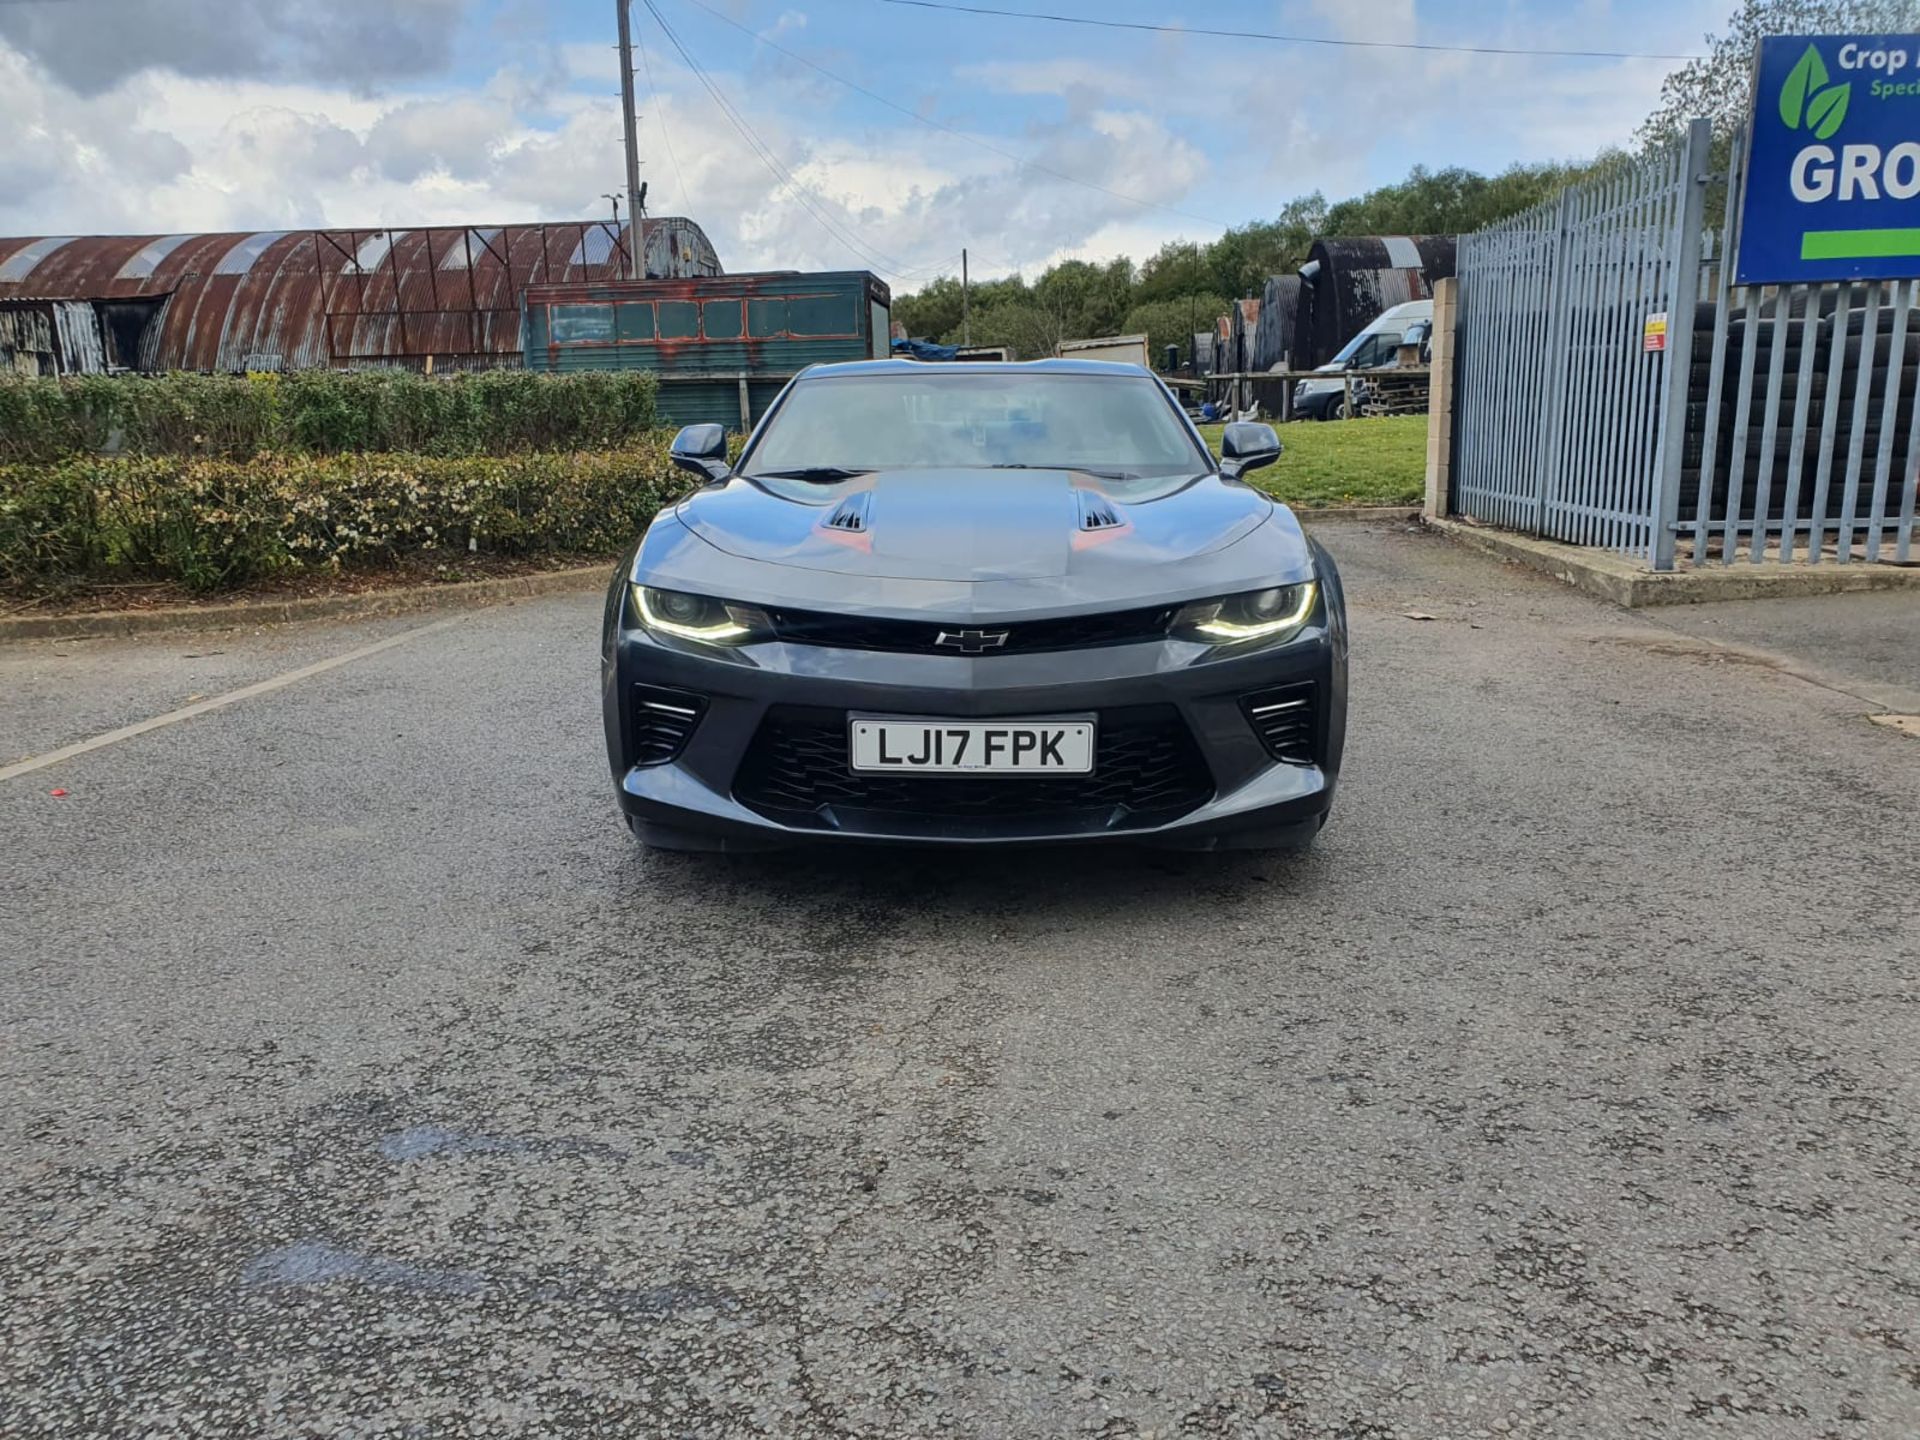 2017/17 REG CHEVROLET CAMARO V8 AUTOMATIC GREY COUPE 50th ANNIVERSARY EDITION, LHD, LOW MILEAGE - Image 4 of 43